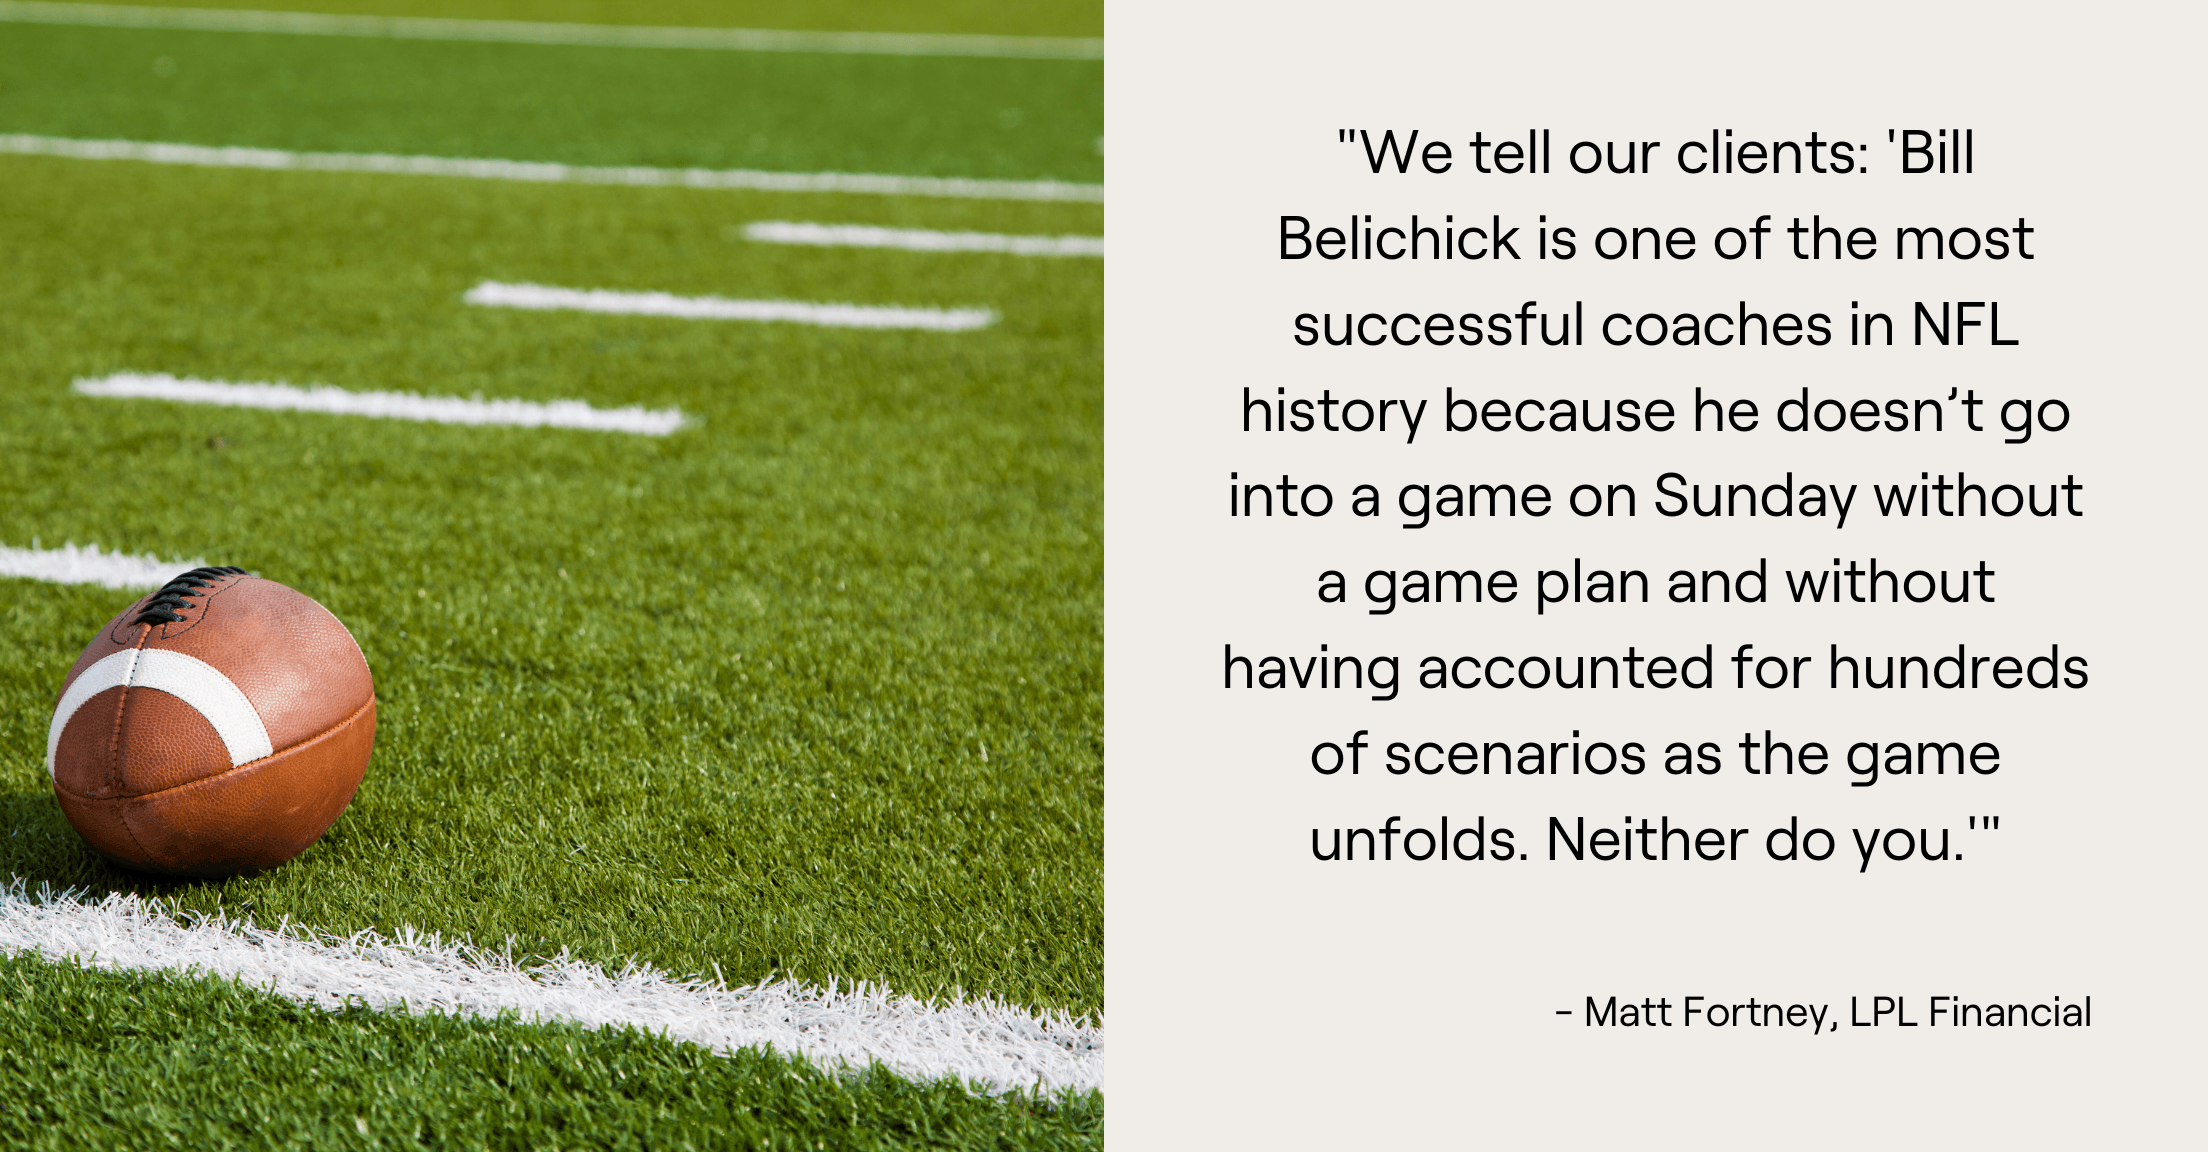 Football on field next to quote, "We tell our clients: 'Bill Belichick is one of the most successful coaches in NFL history because he doesn't go into a game on Sunday without a game plan and without having accounted for hundreds of scenarios as the game unfolds. Neither do you.'"